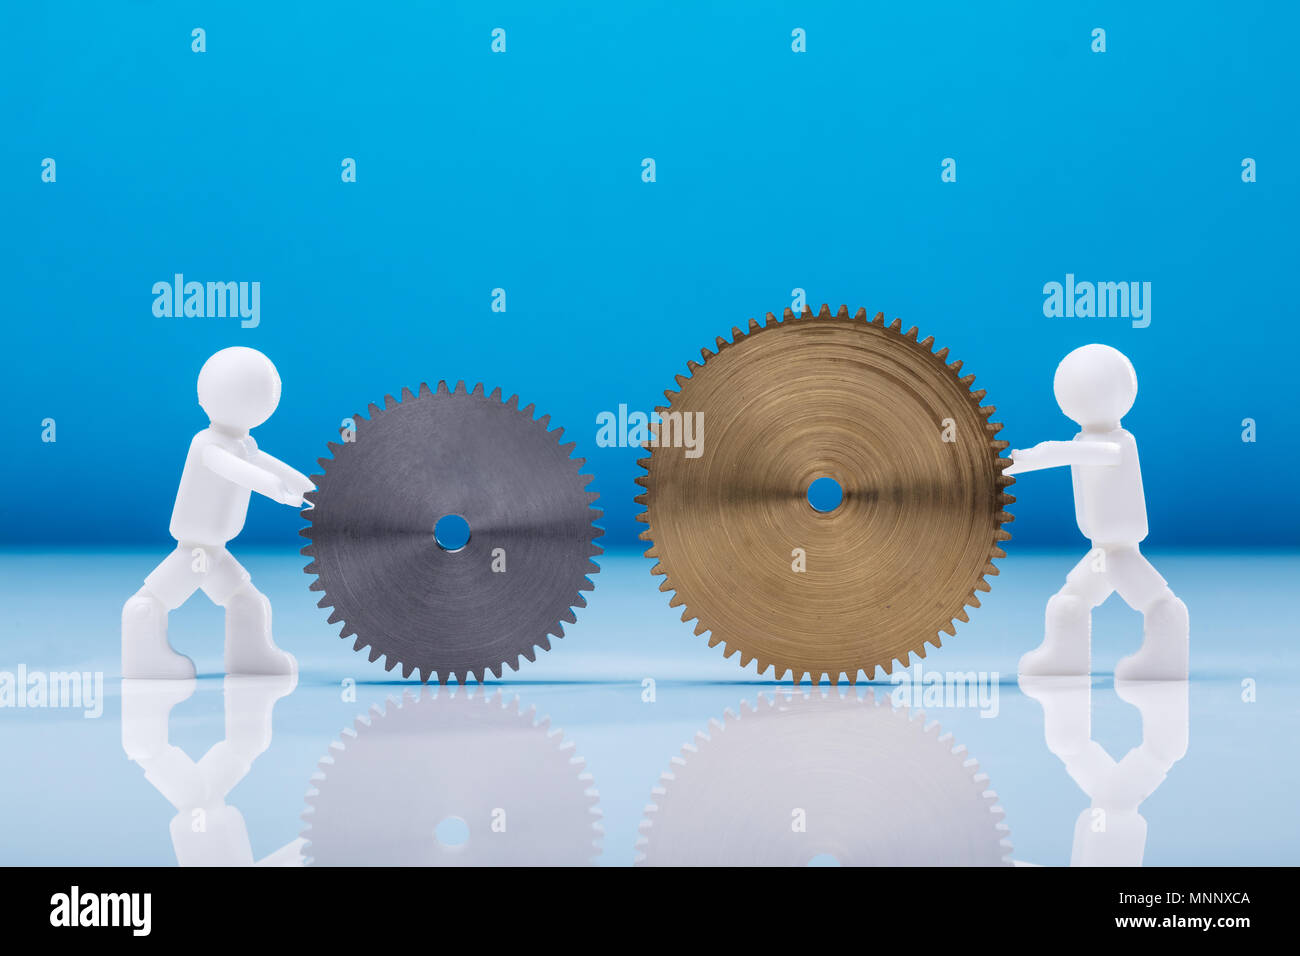 Side View Of Two White Human Figures Holding Cogwheels Against Blue Background Stock Photo